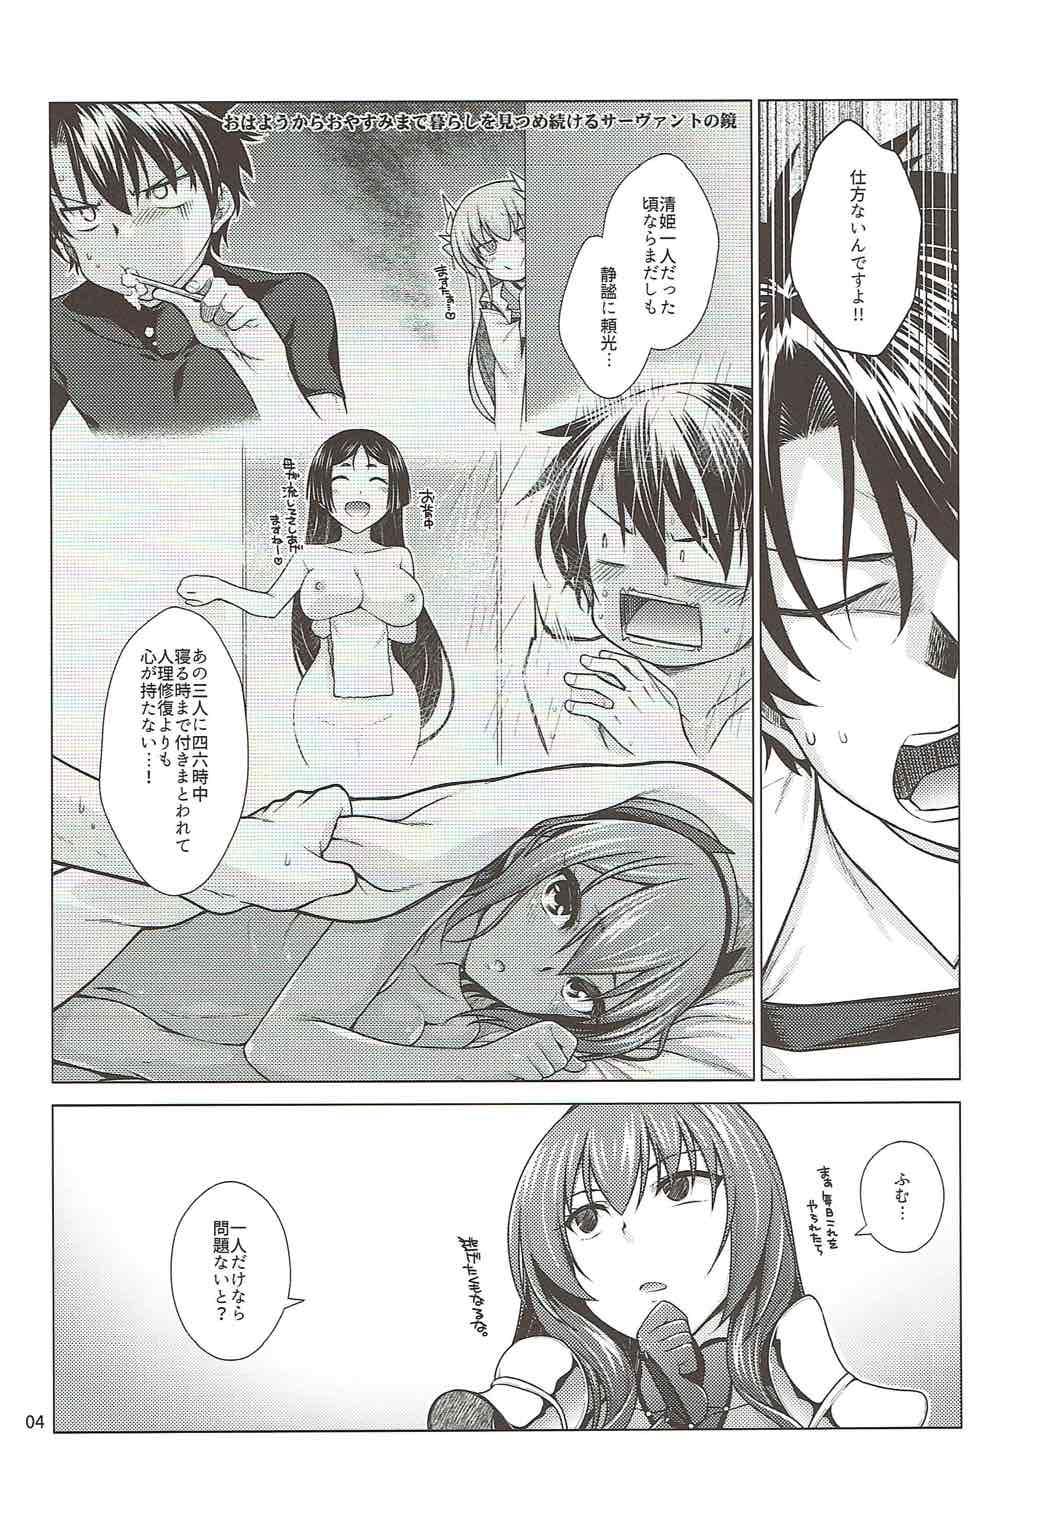 Whores Scathach Shishou to Celt Shiki Gachihamex! - Fate grand order Freaky - Page 3